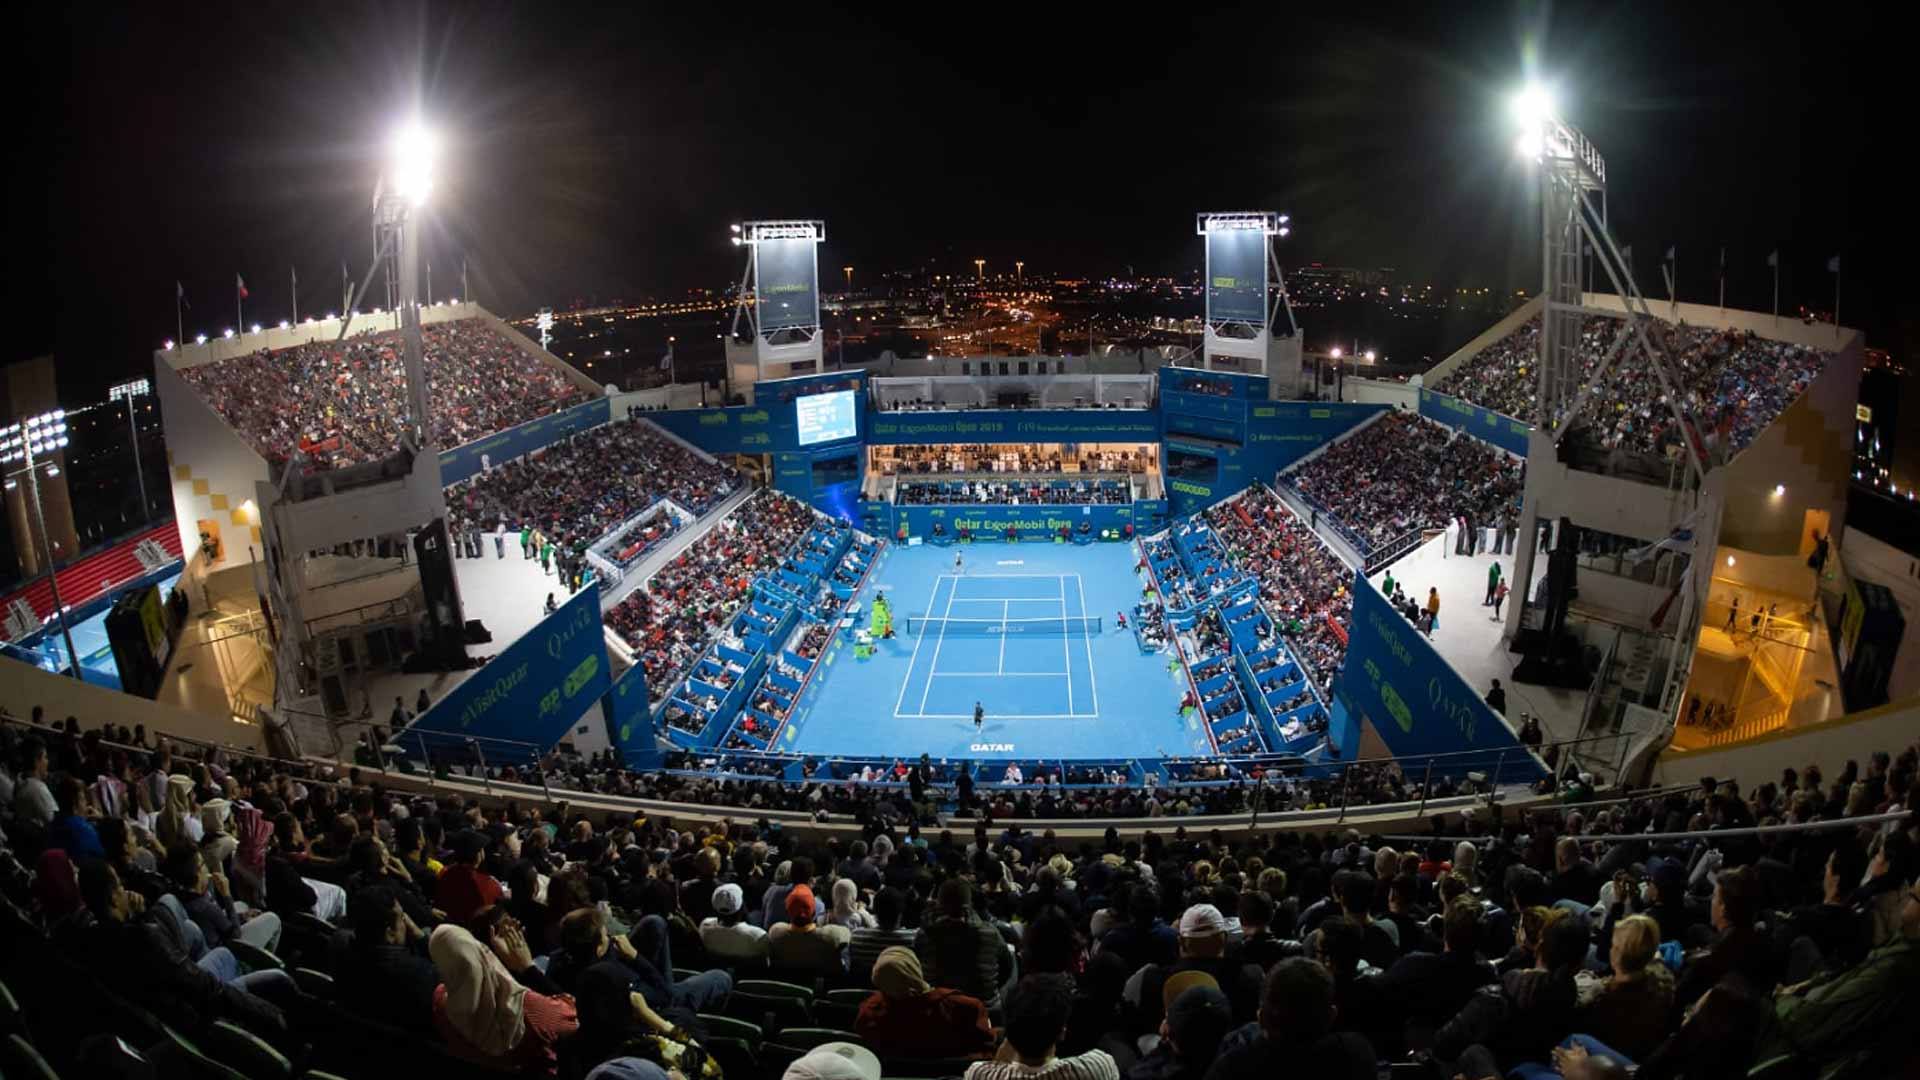 The <a href='https://www.atptour.com/en/tournaments/doha/451/overview'>Qatar ExxonMobil Open</a> in Doha claims the Tournament of the Year award in the 250 category in the 2019 ATP Awards.